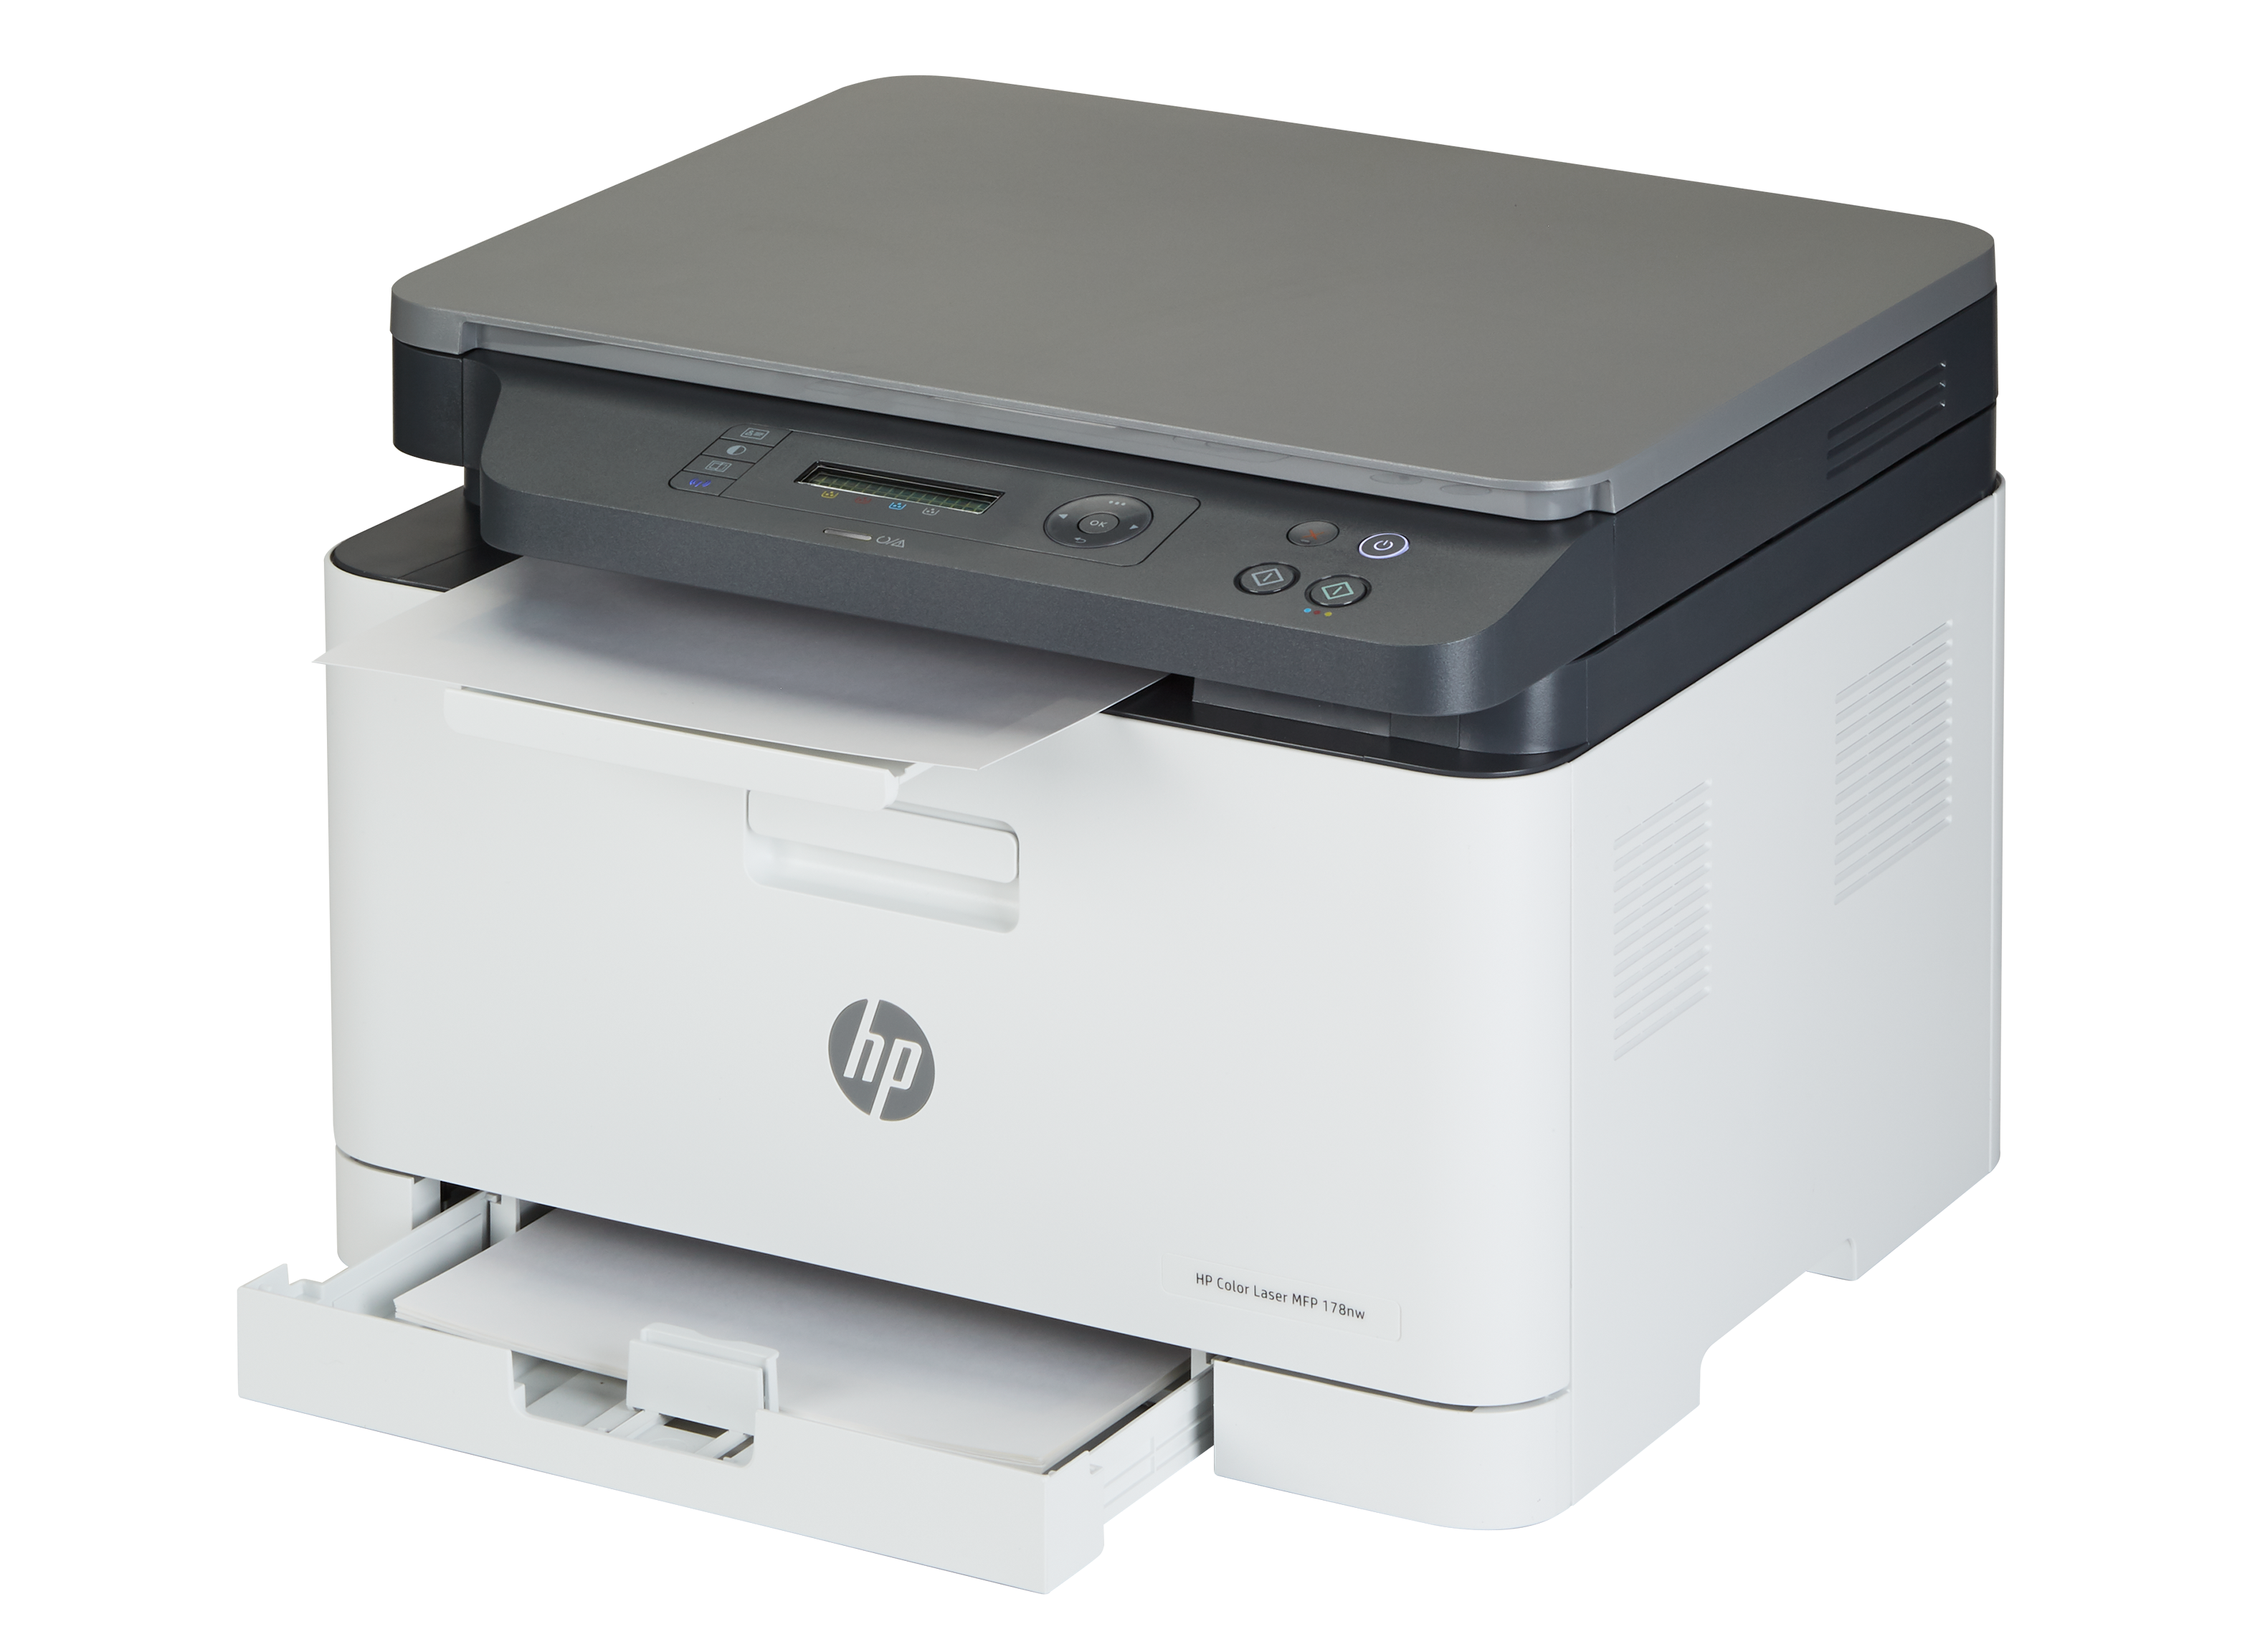 HP Color Laser MFP 178nw Printer Review - Consumer Reports